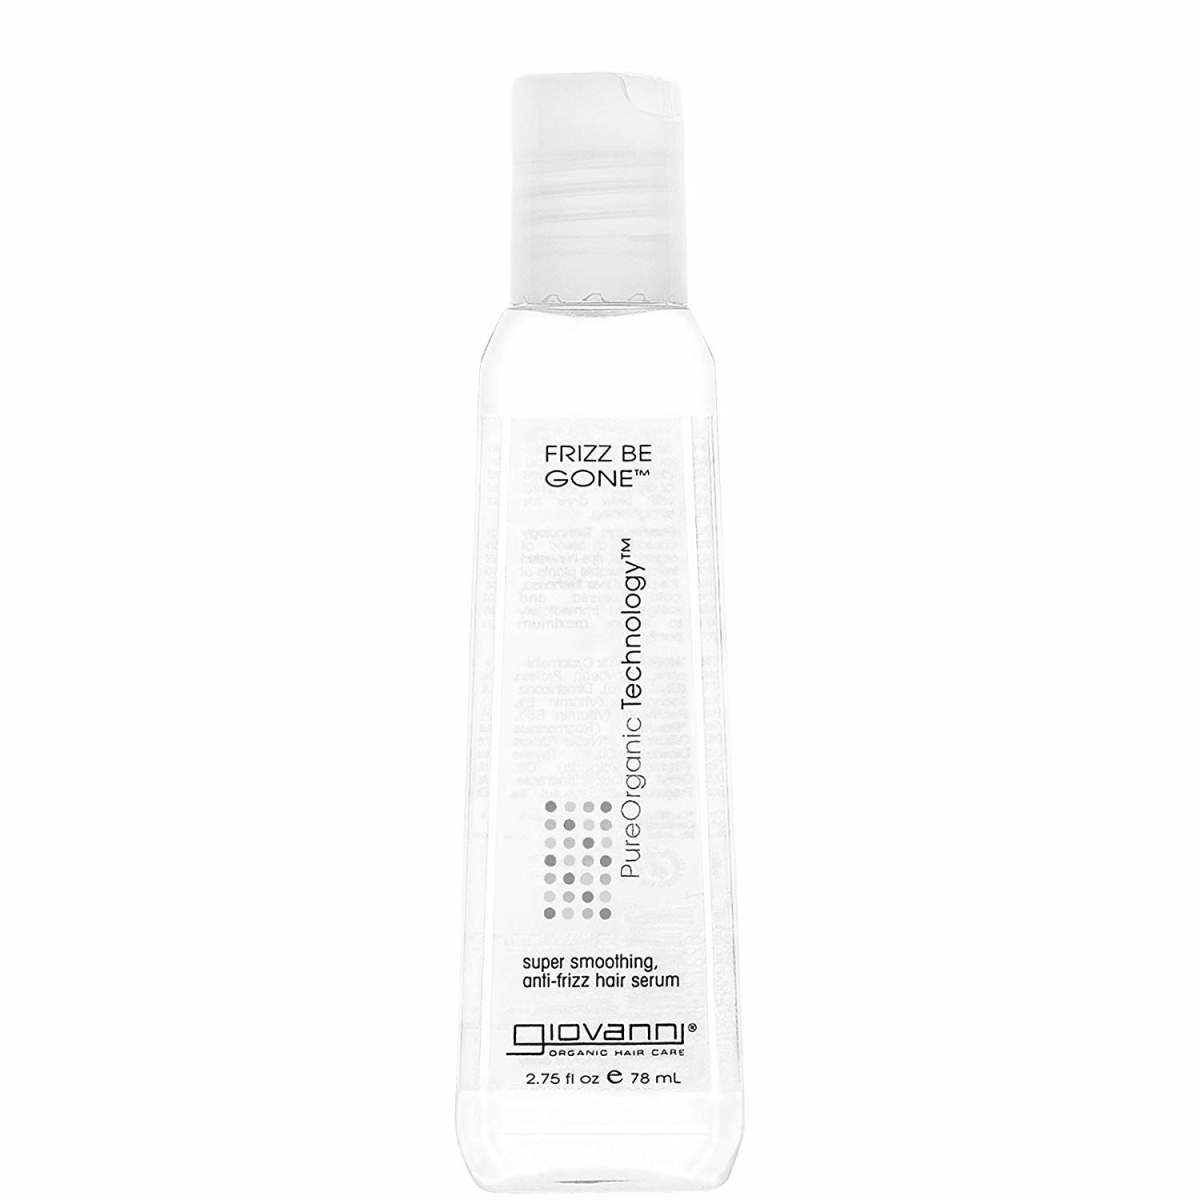 Picture of Giovanni KHFM00407536 Hair Care Frizz Be Gone, 2.75 oz